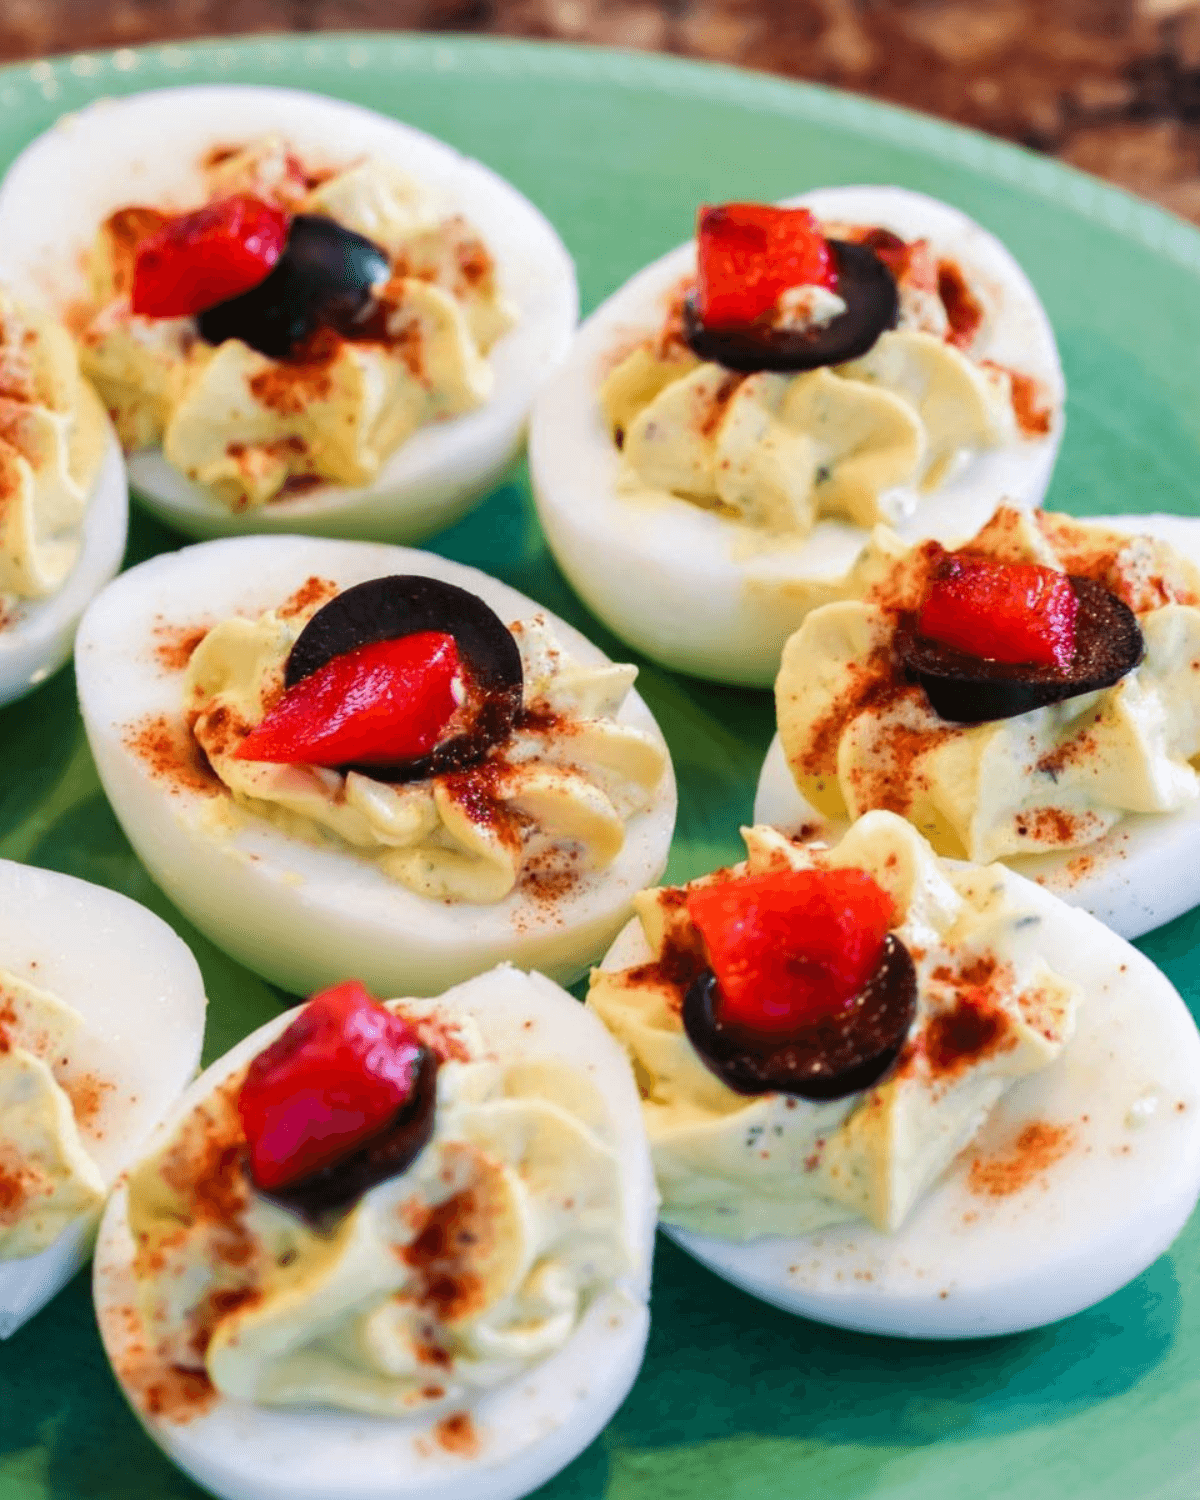 A plate of deviled eggs without mayo, garnished with paprika and a slice of olive and red pepper.